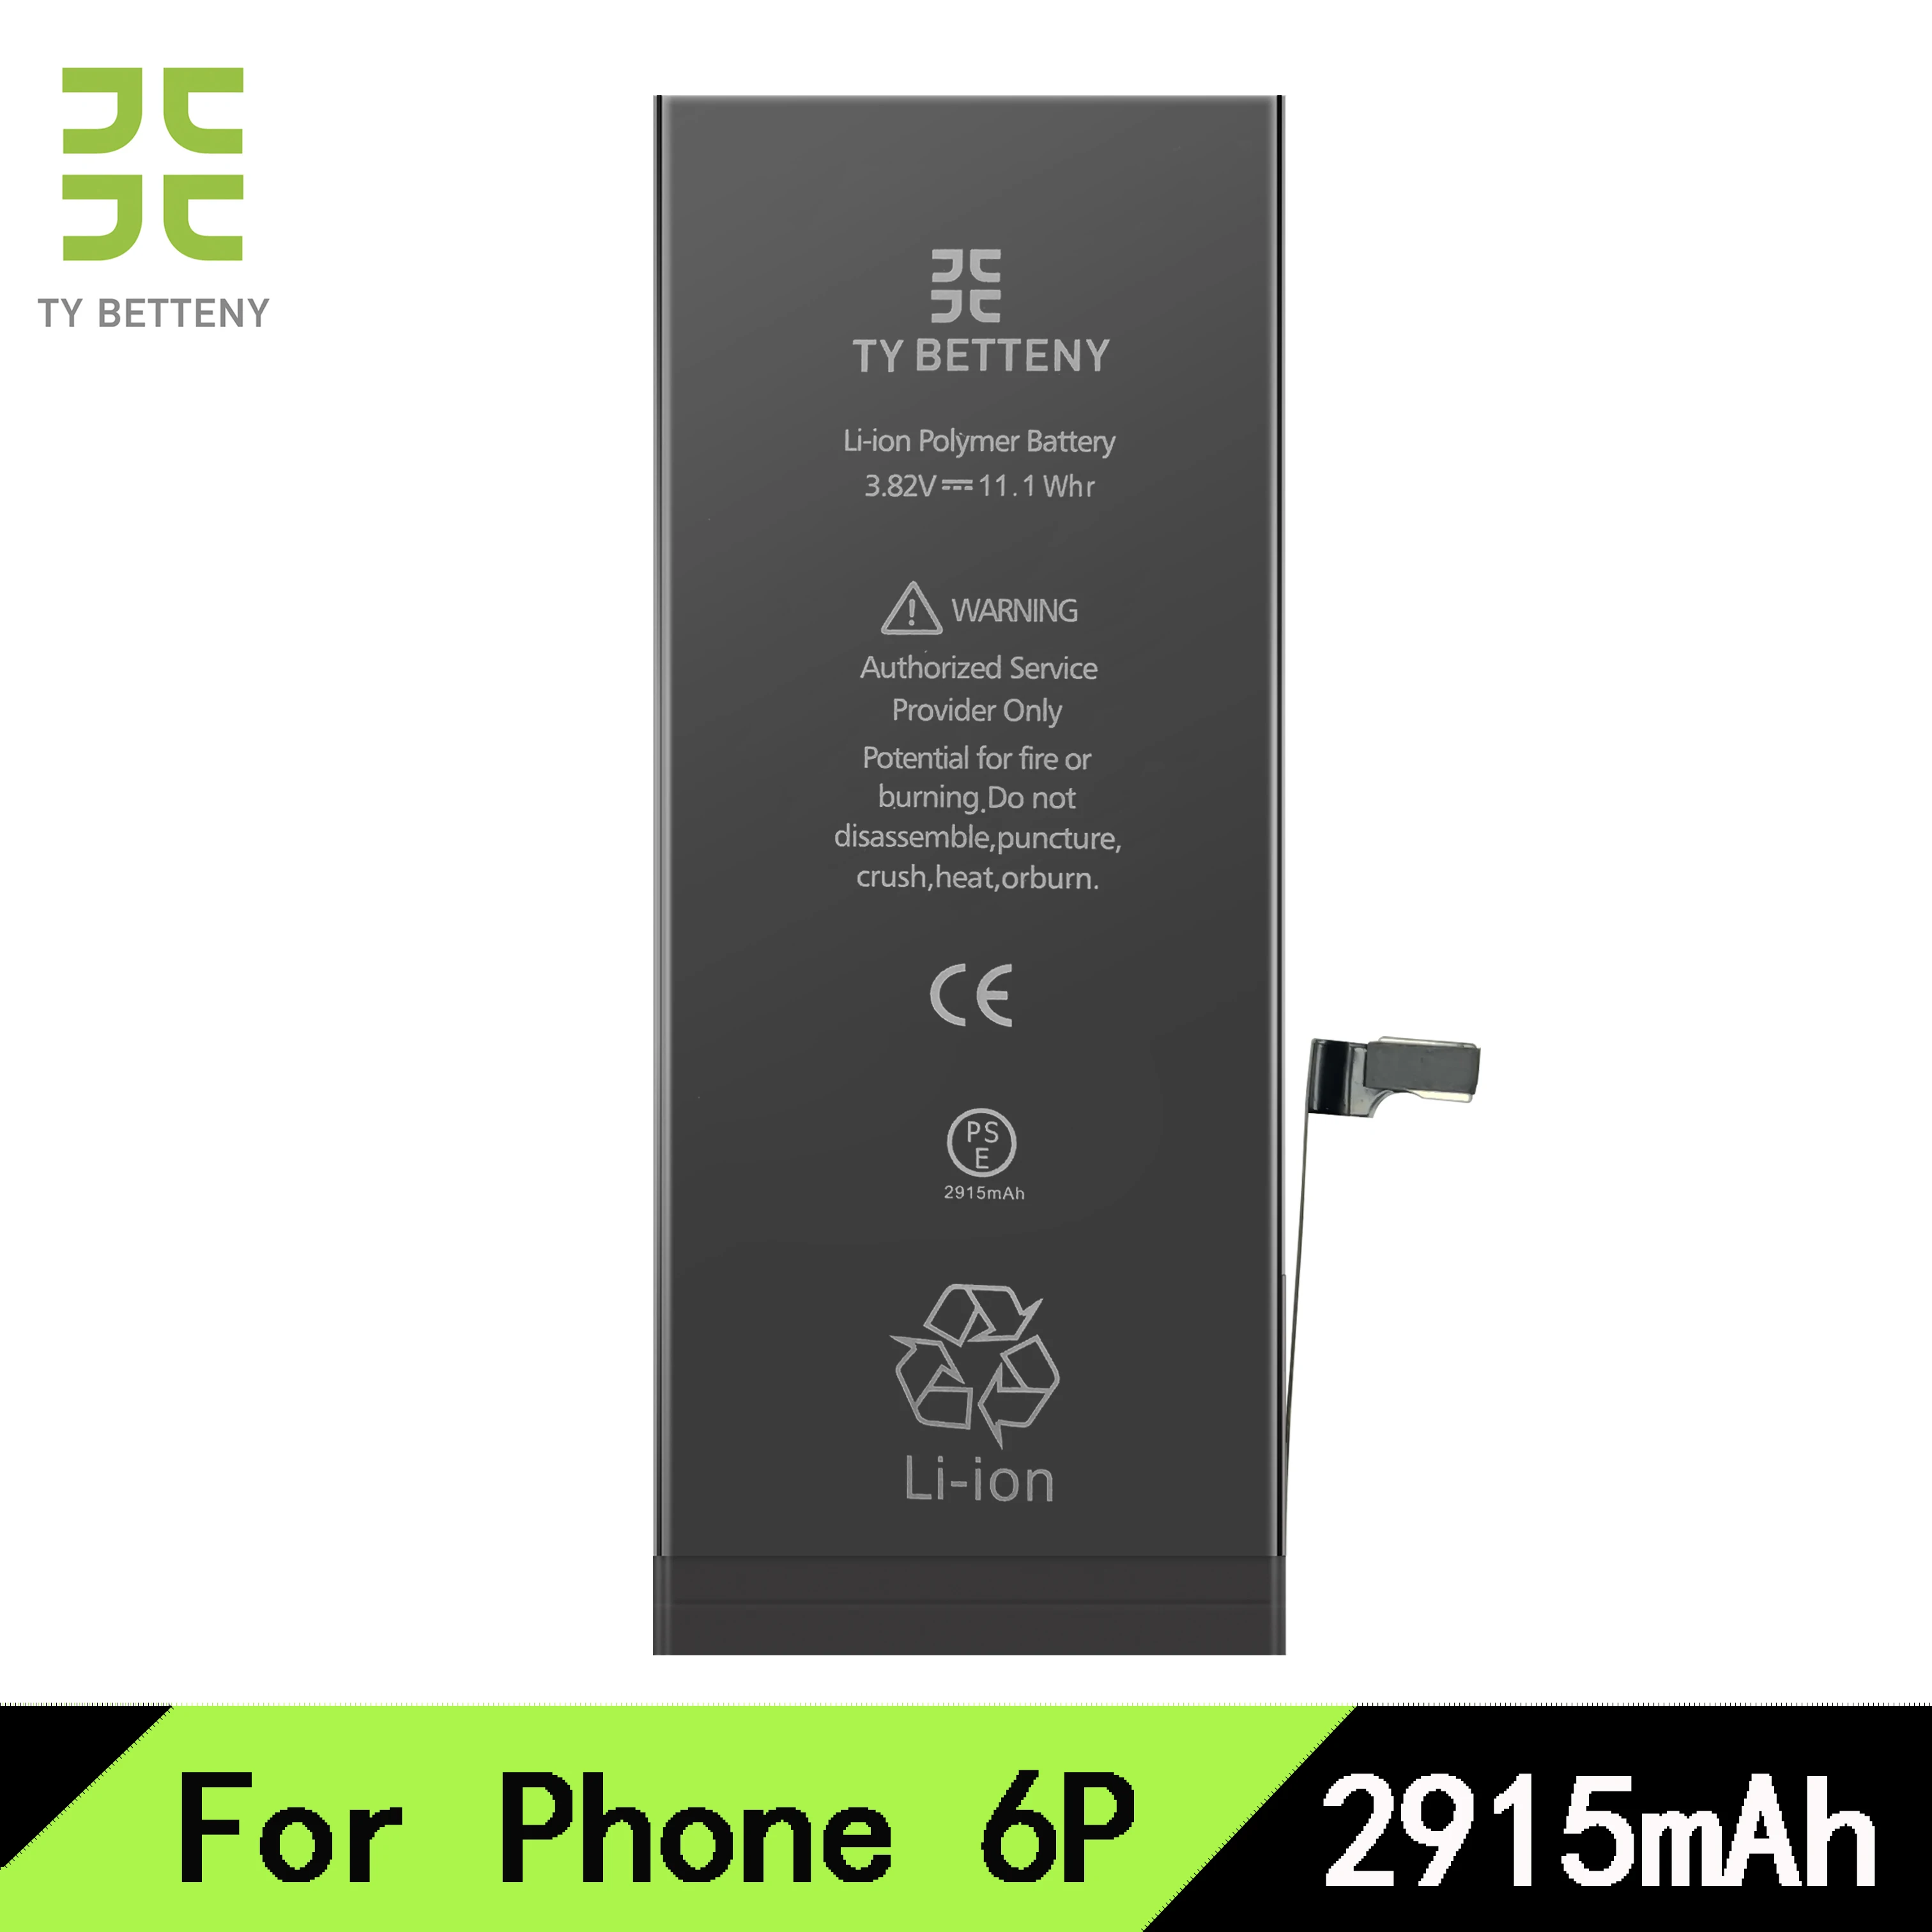 Factory Price 3 v 2915mah Battery For Iphone 6 Plus 6p 6 P Battery 4 5 6 7 8 X Real Capacity Buy Battery For Iphone 6 Plus For Iphone 6p Battery Battery For Iphone Product On Alibaba Com